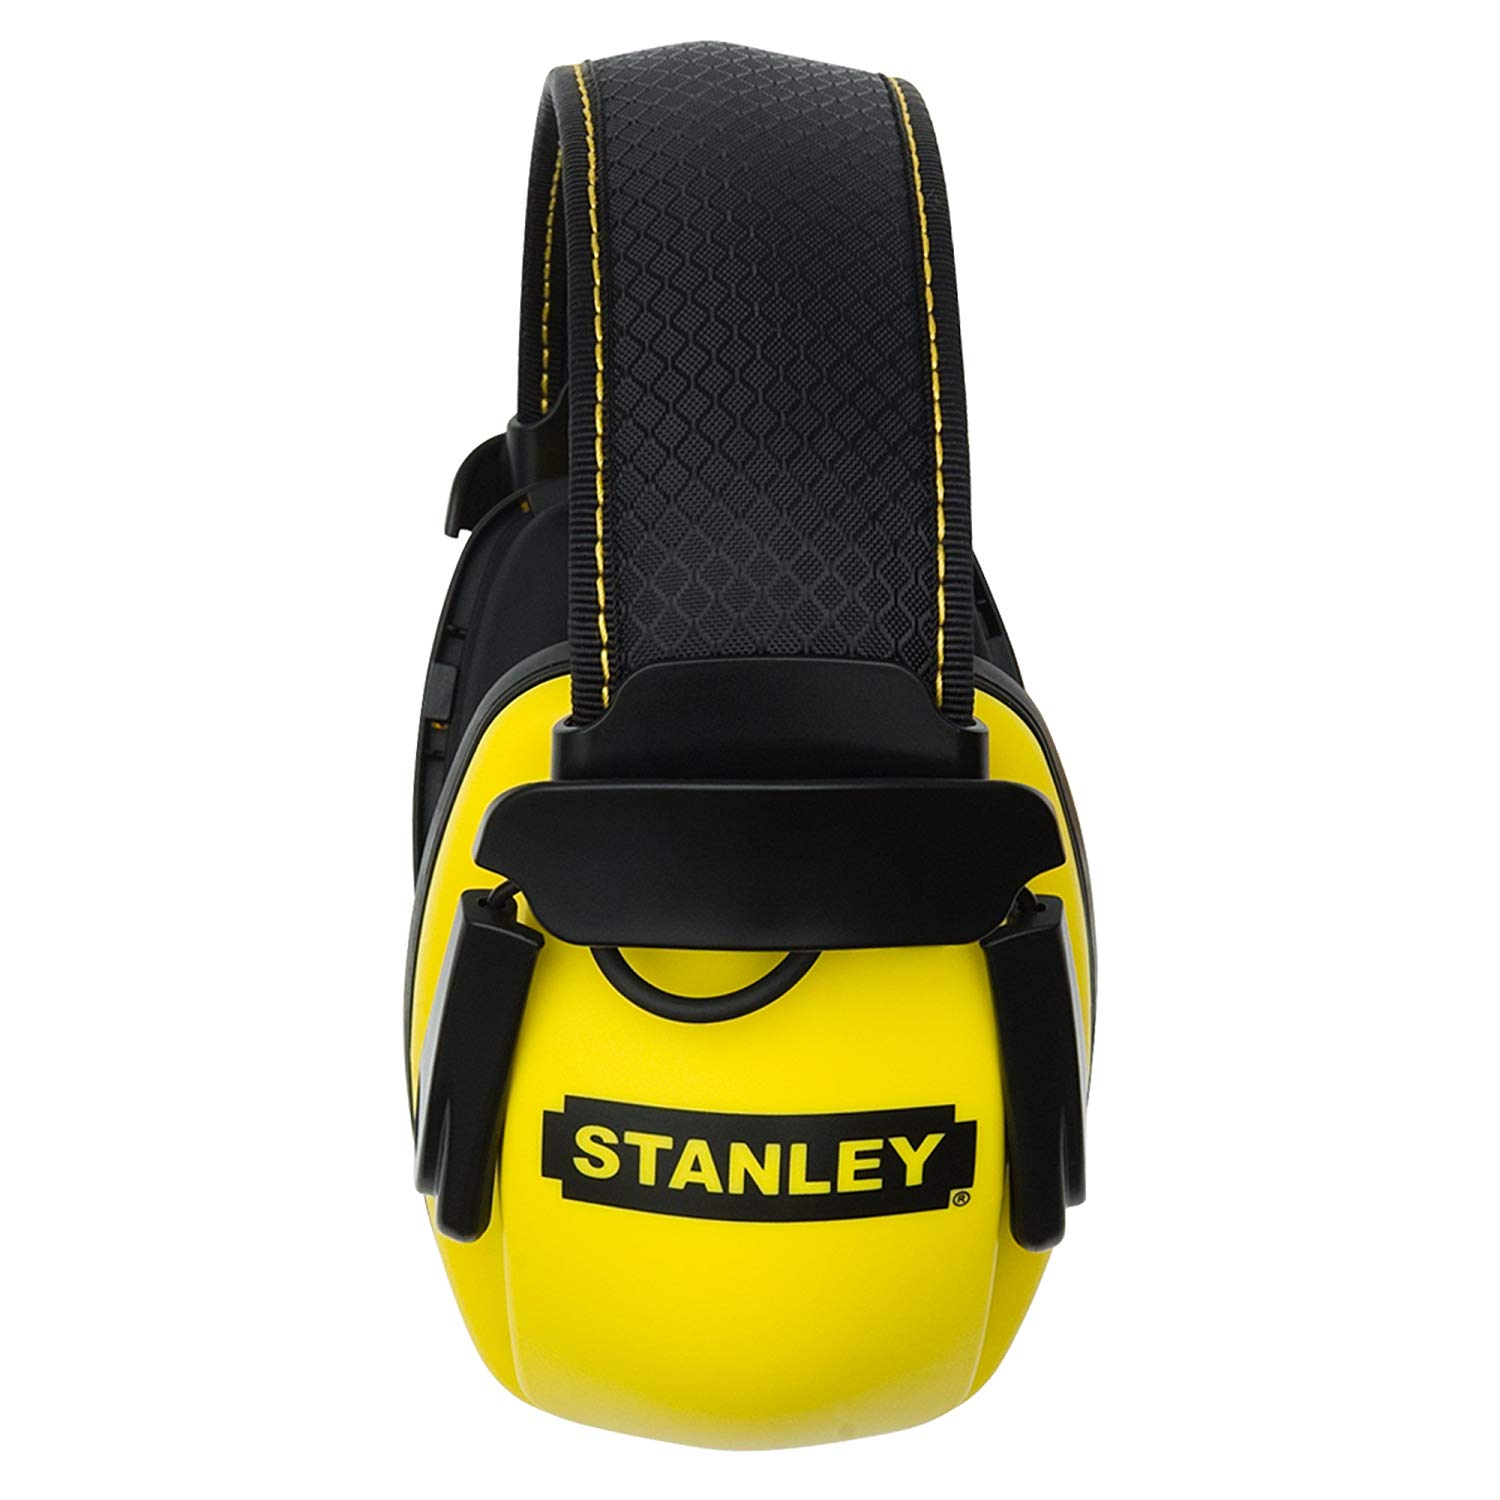 Stanley Sync Stereo Earmuff with MP3 Connection (RST-63011) - image 3 of 7